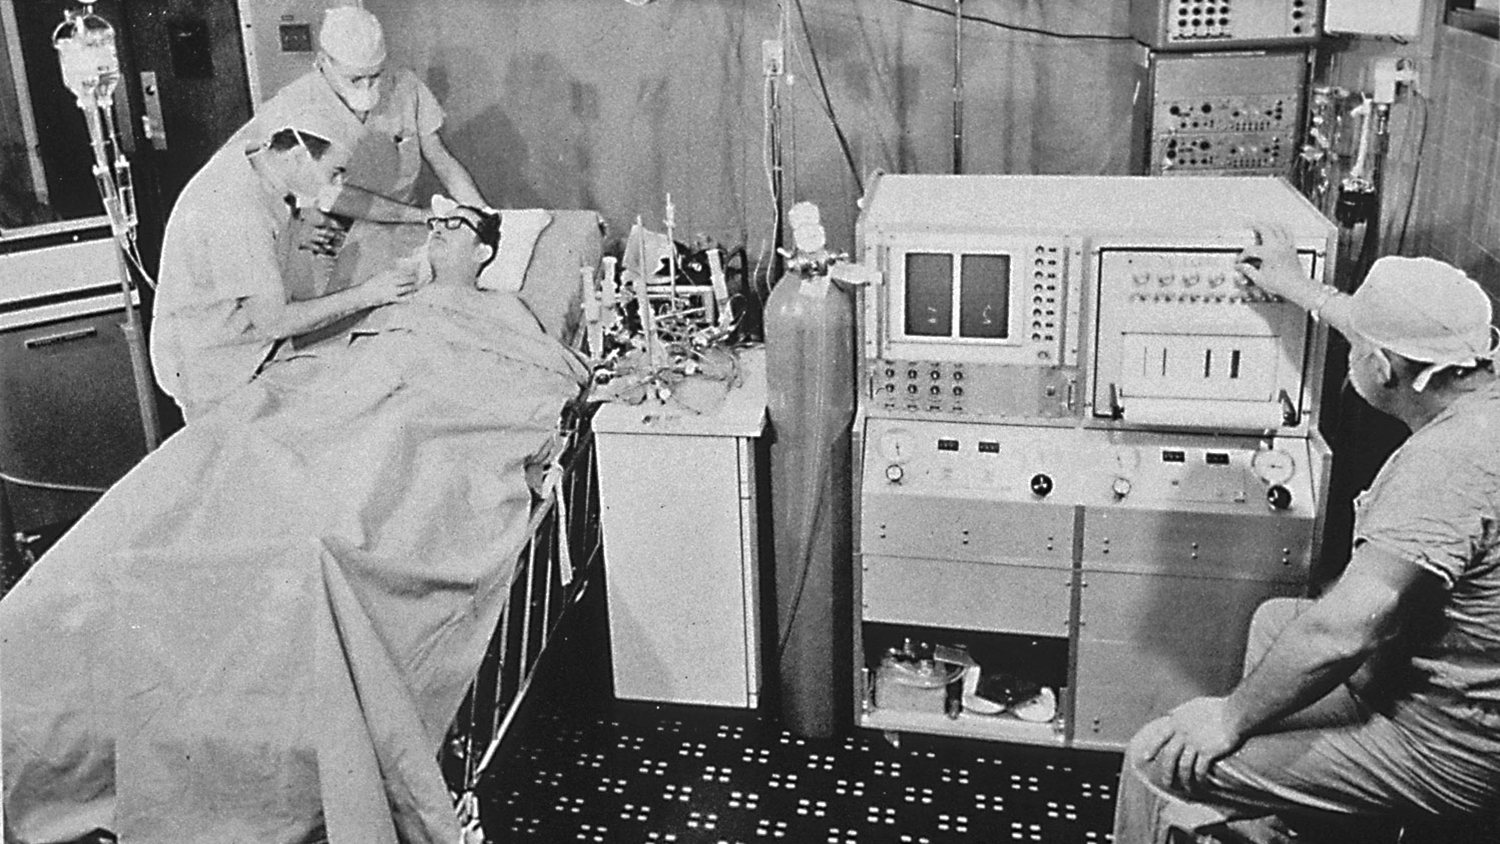 50th Anniversary of the World's First Total Artificial Heart - Texas Heart Institute